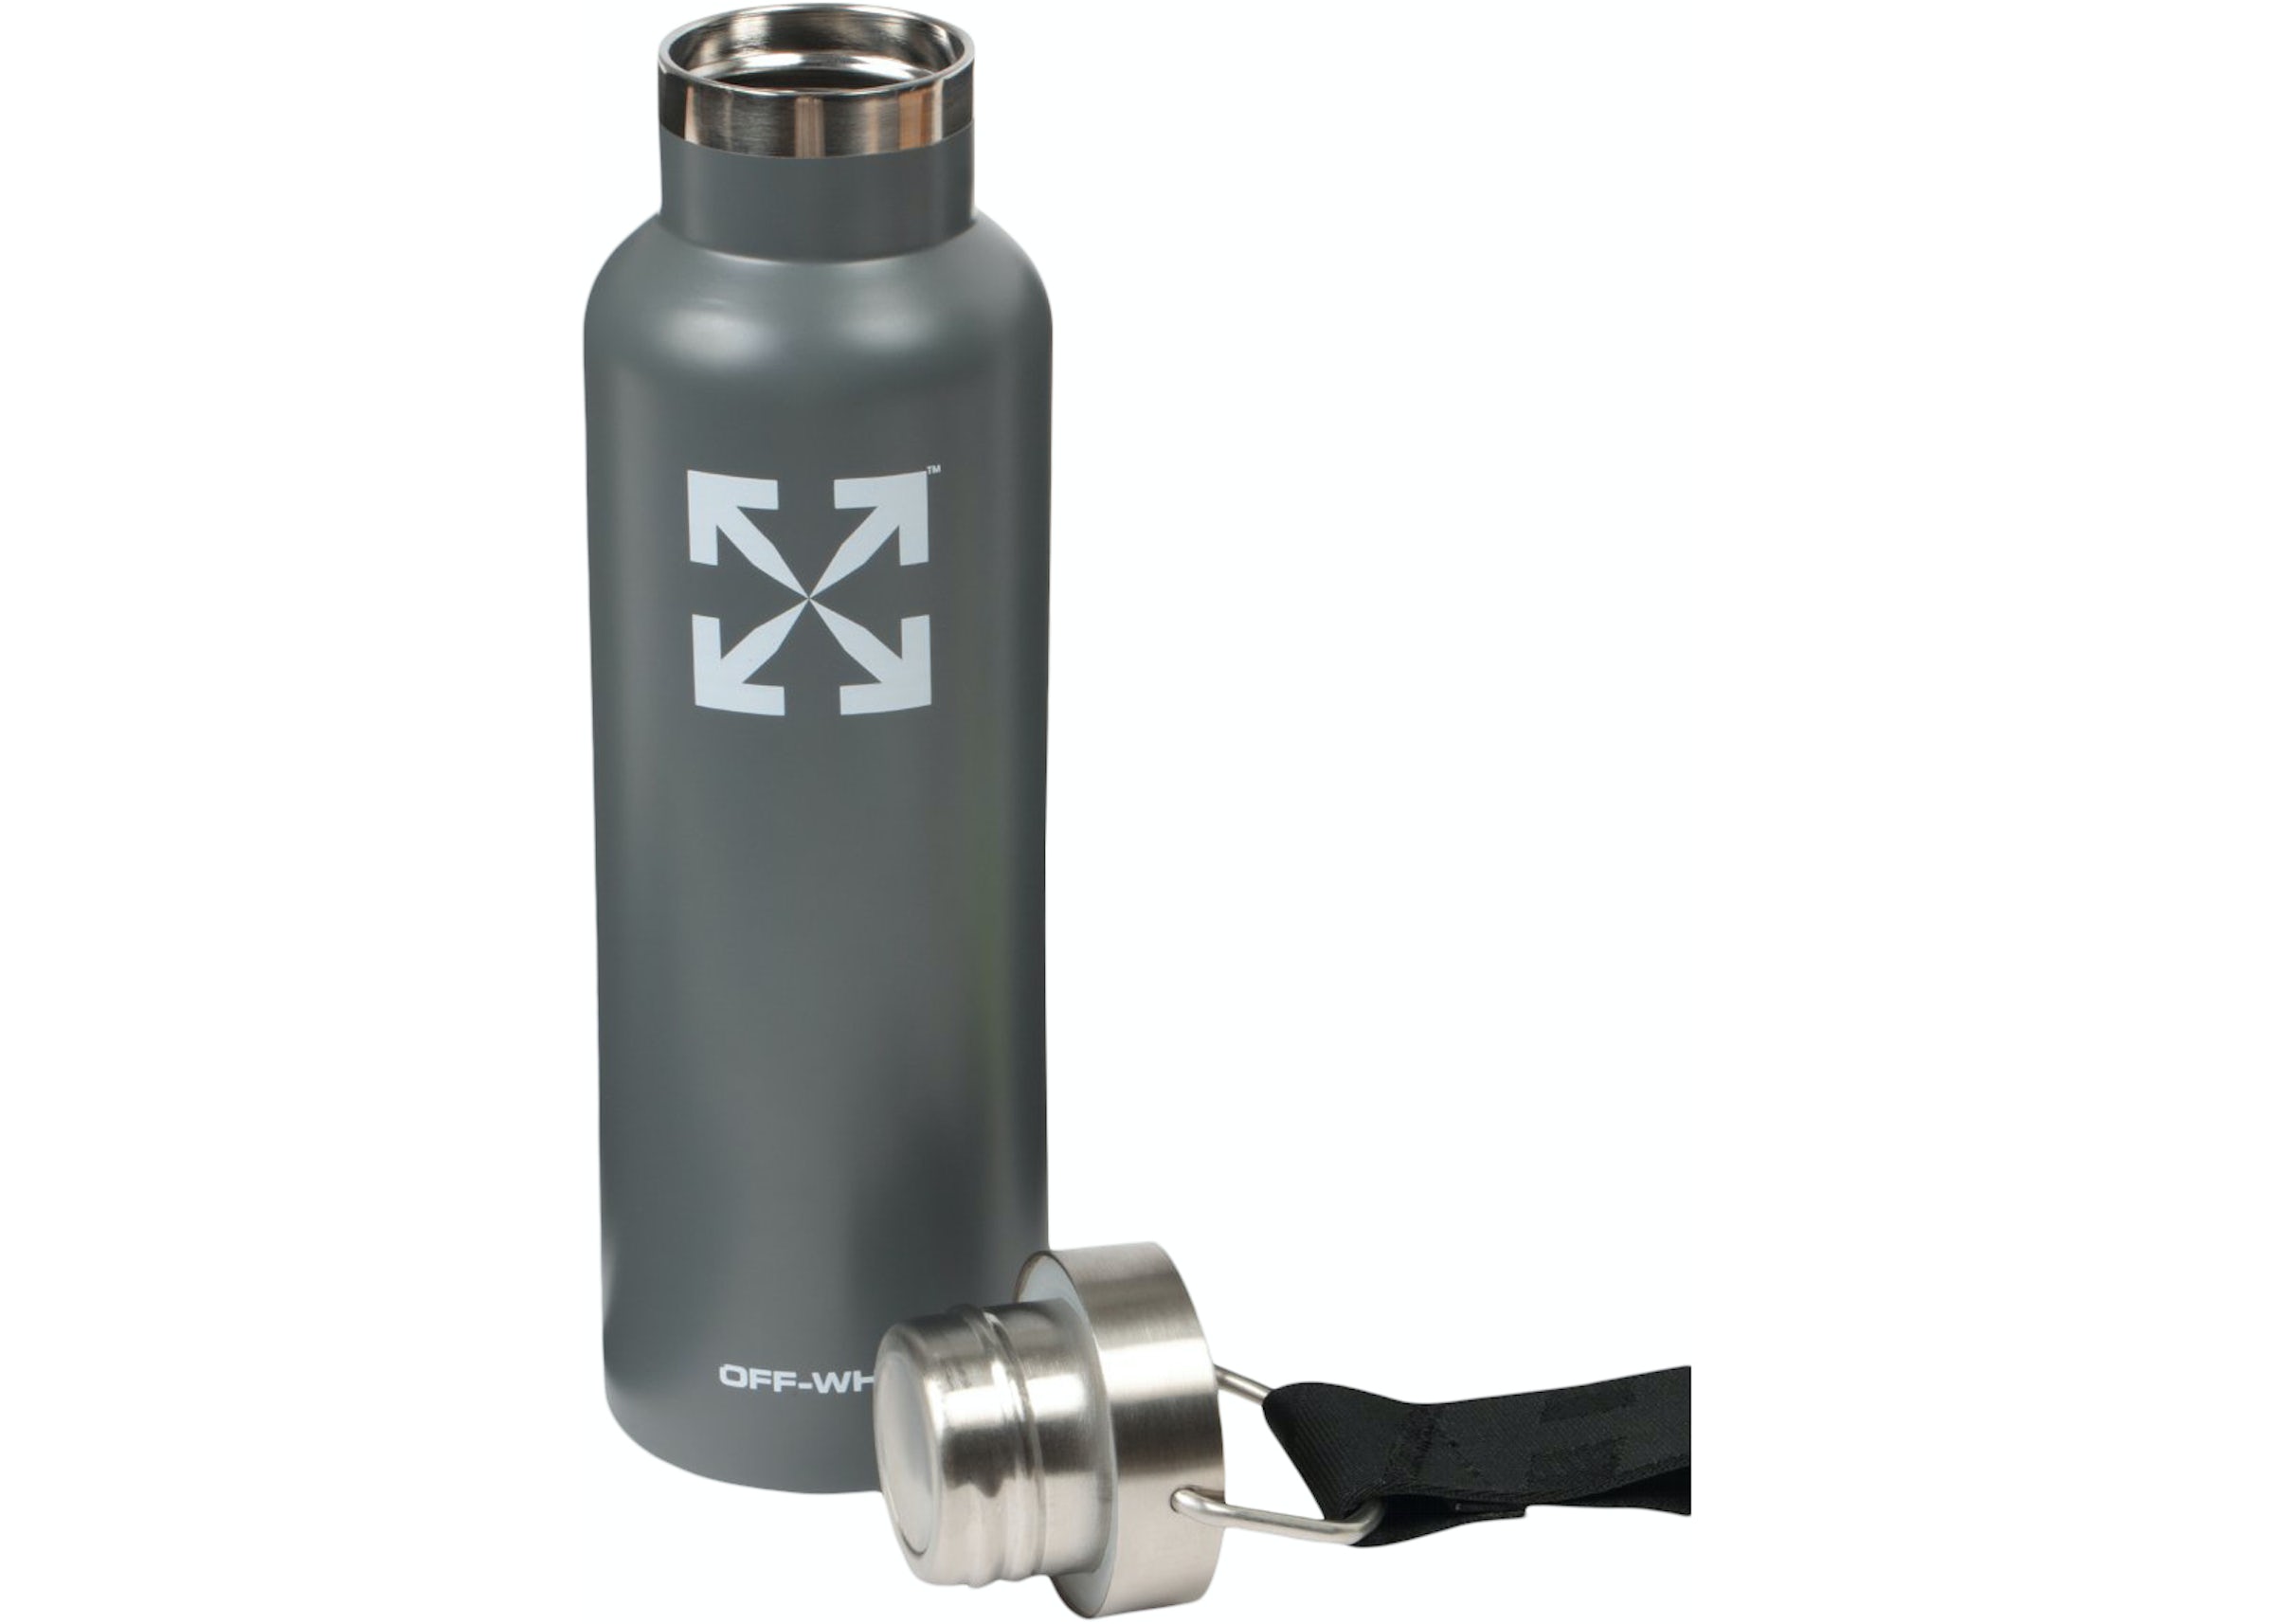 https://images.stockx.com/images/OFF-WHITE-Thermos-Water-Bottle-Silver.jpg?fit=fill&bg=FFFFFF&w=1200&h=857&fm=jpg&auto=compress&dpr=2&trim=color&updated_at=1627945629&q=60